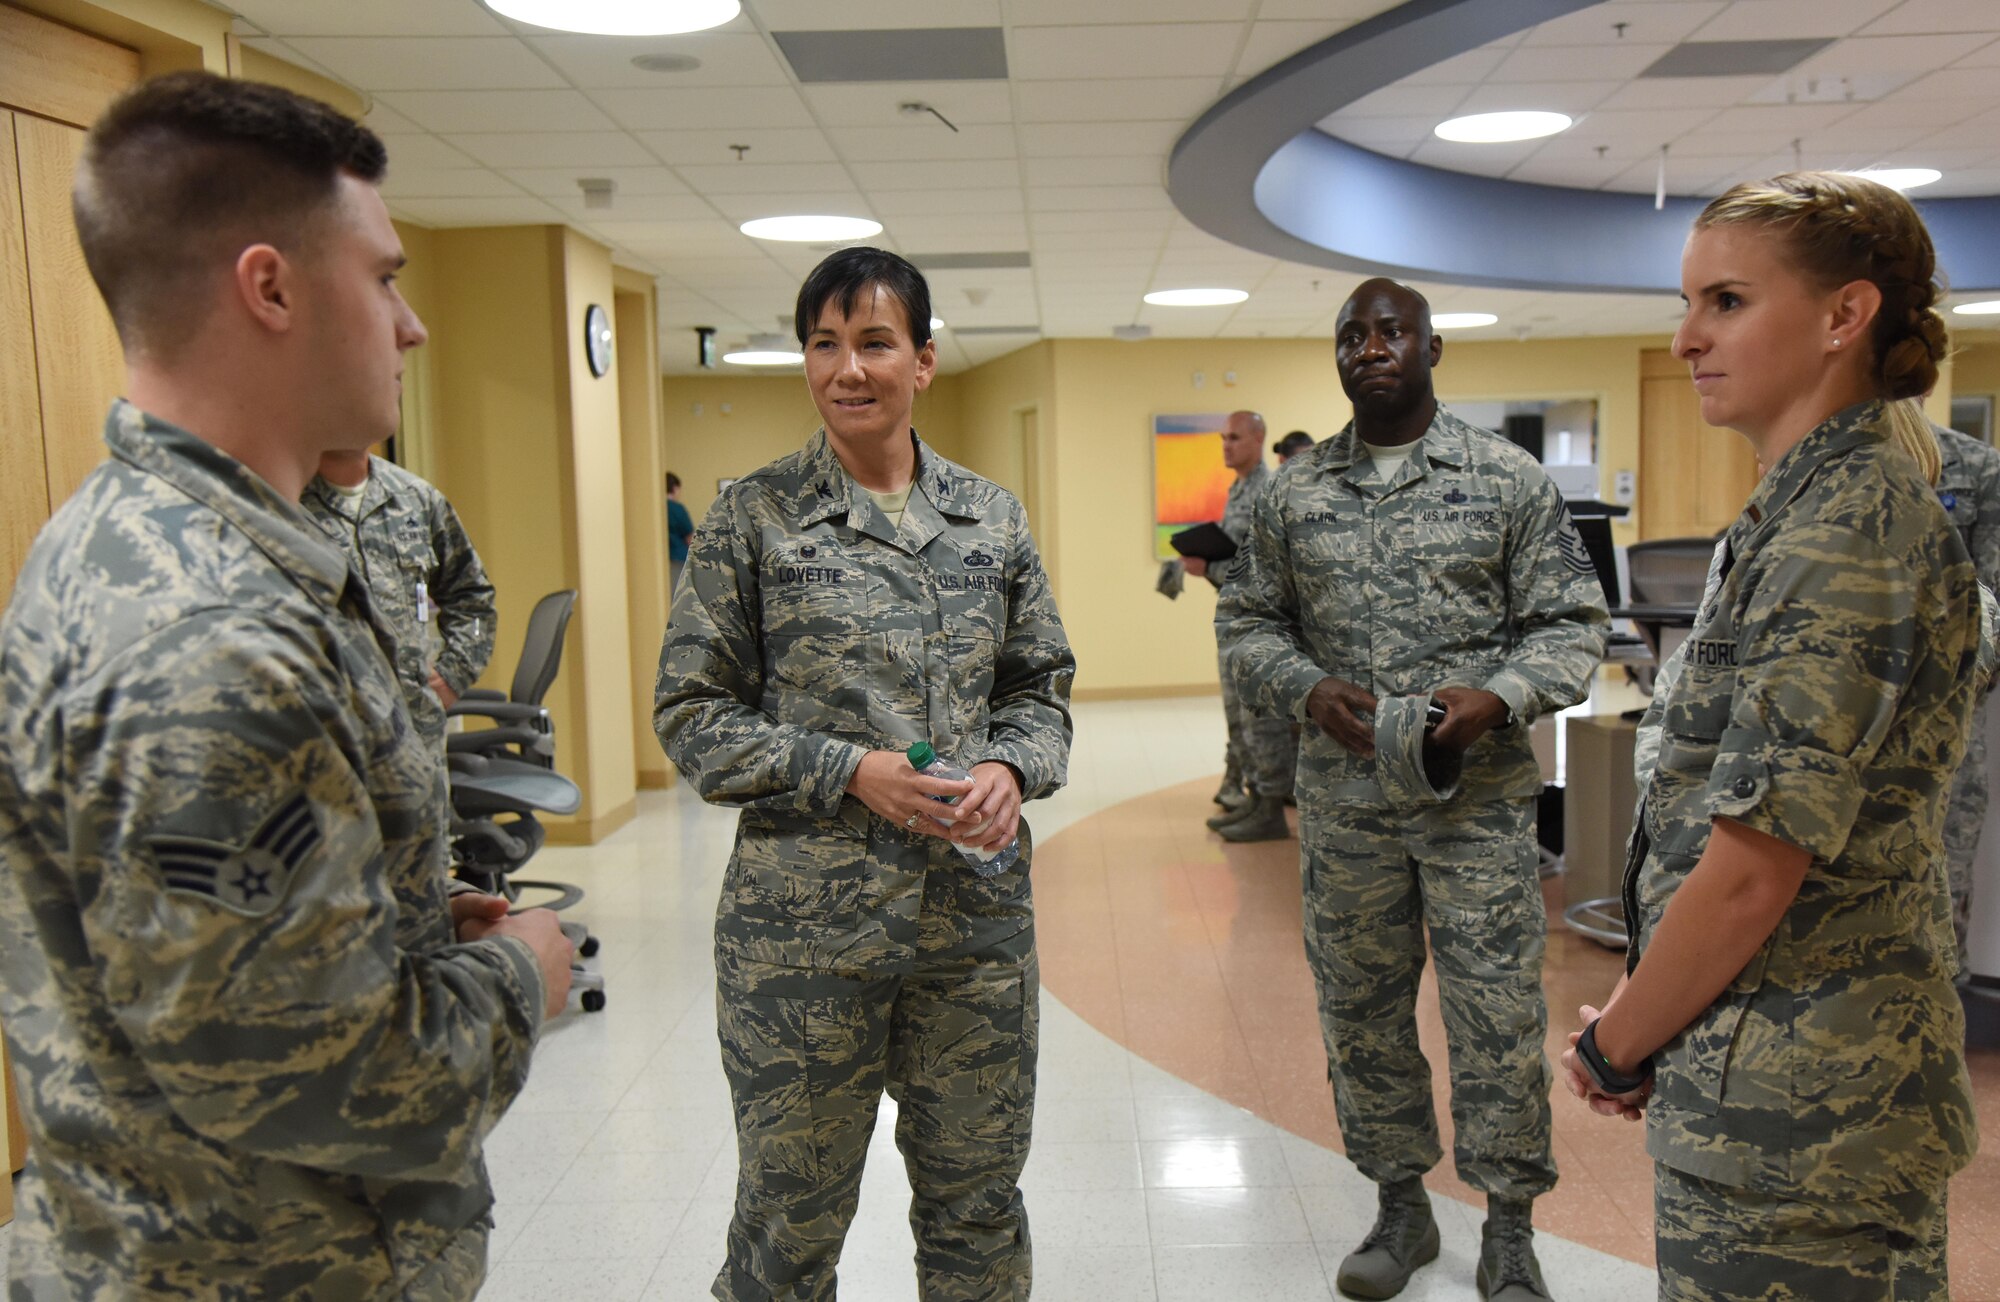 Senior Airman Graham Hoch, 81st Inpatient Operations Squadron aerospace medical technician, briefs Col. Debra Lovette, 81st Training Wing commander, on squadron capabilities during an 81st Medical Group orientation tour in the Keesler Medical Center June 16, 2017, on Keesler Air Force Base, Miss. The purpose of the tour was to familiarize Lovette with the group’s mission, operations and personnel. (U.S. Air Force photo by Kemberly Groue)